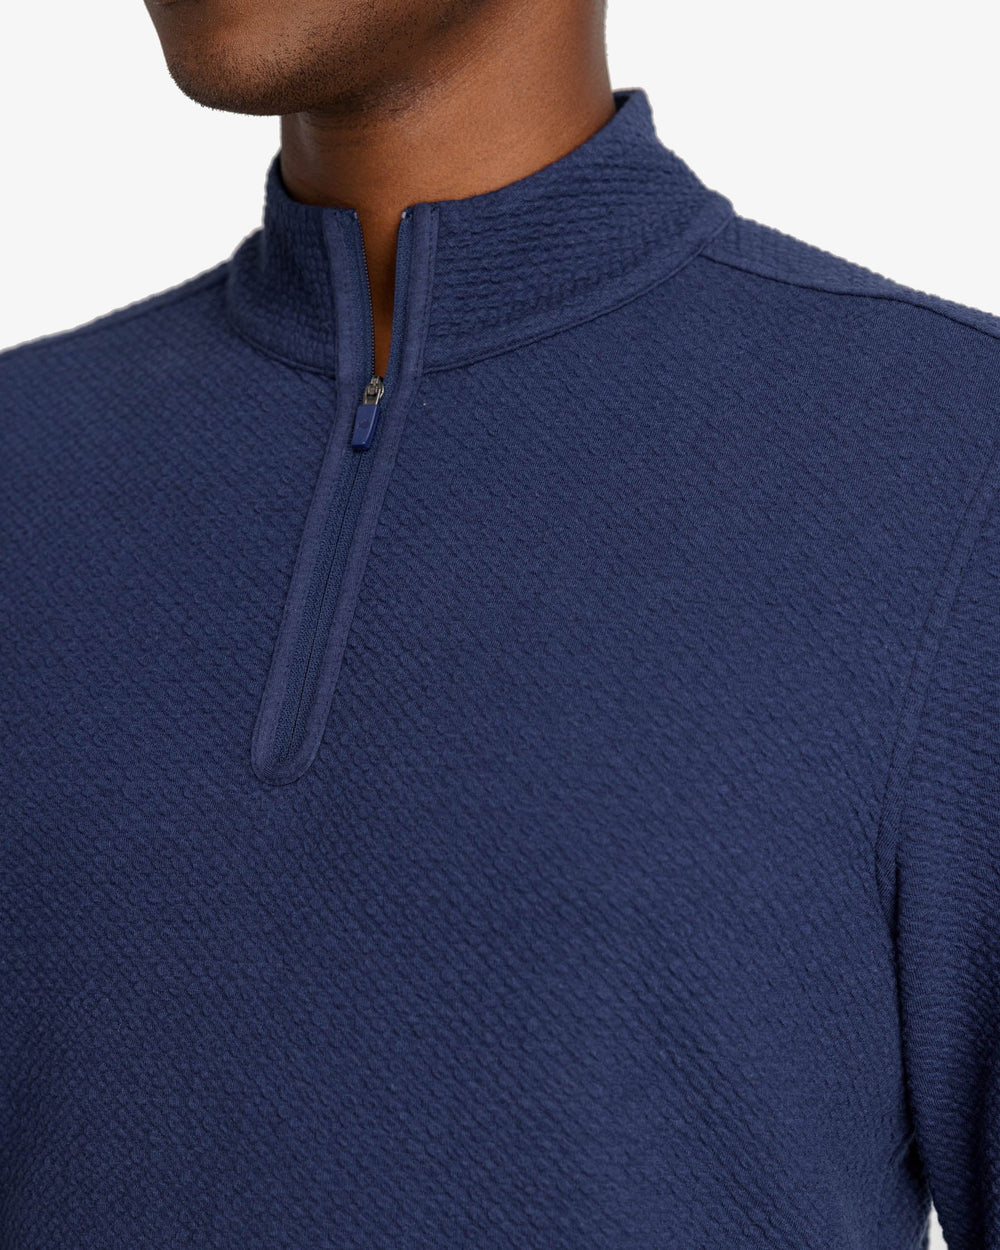 The detail view of the Outbound Quarter Zip Pullover by Southern Tide - Heather True Navy